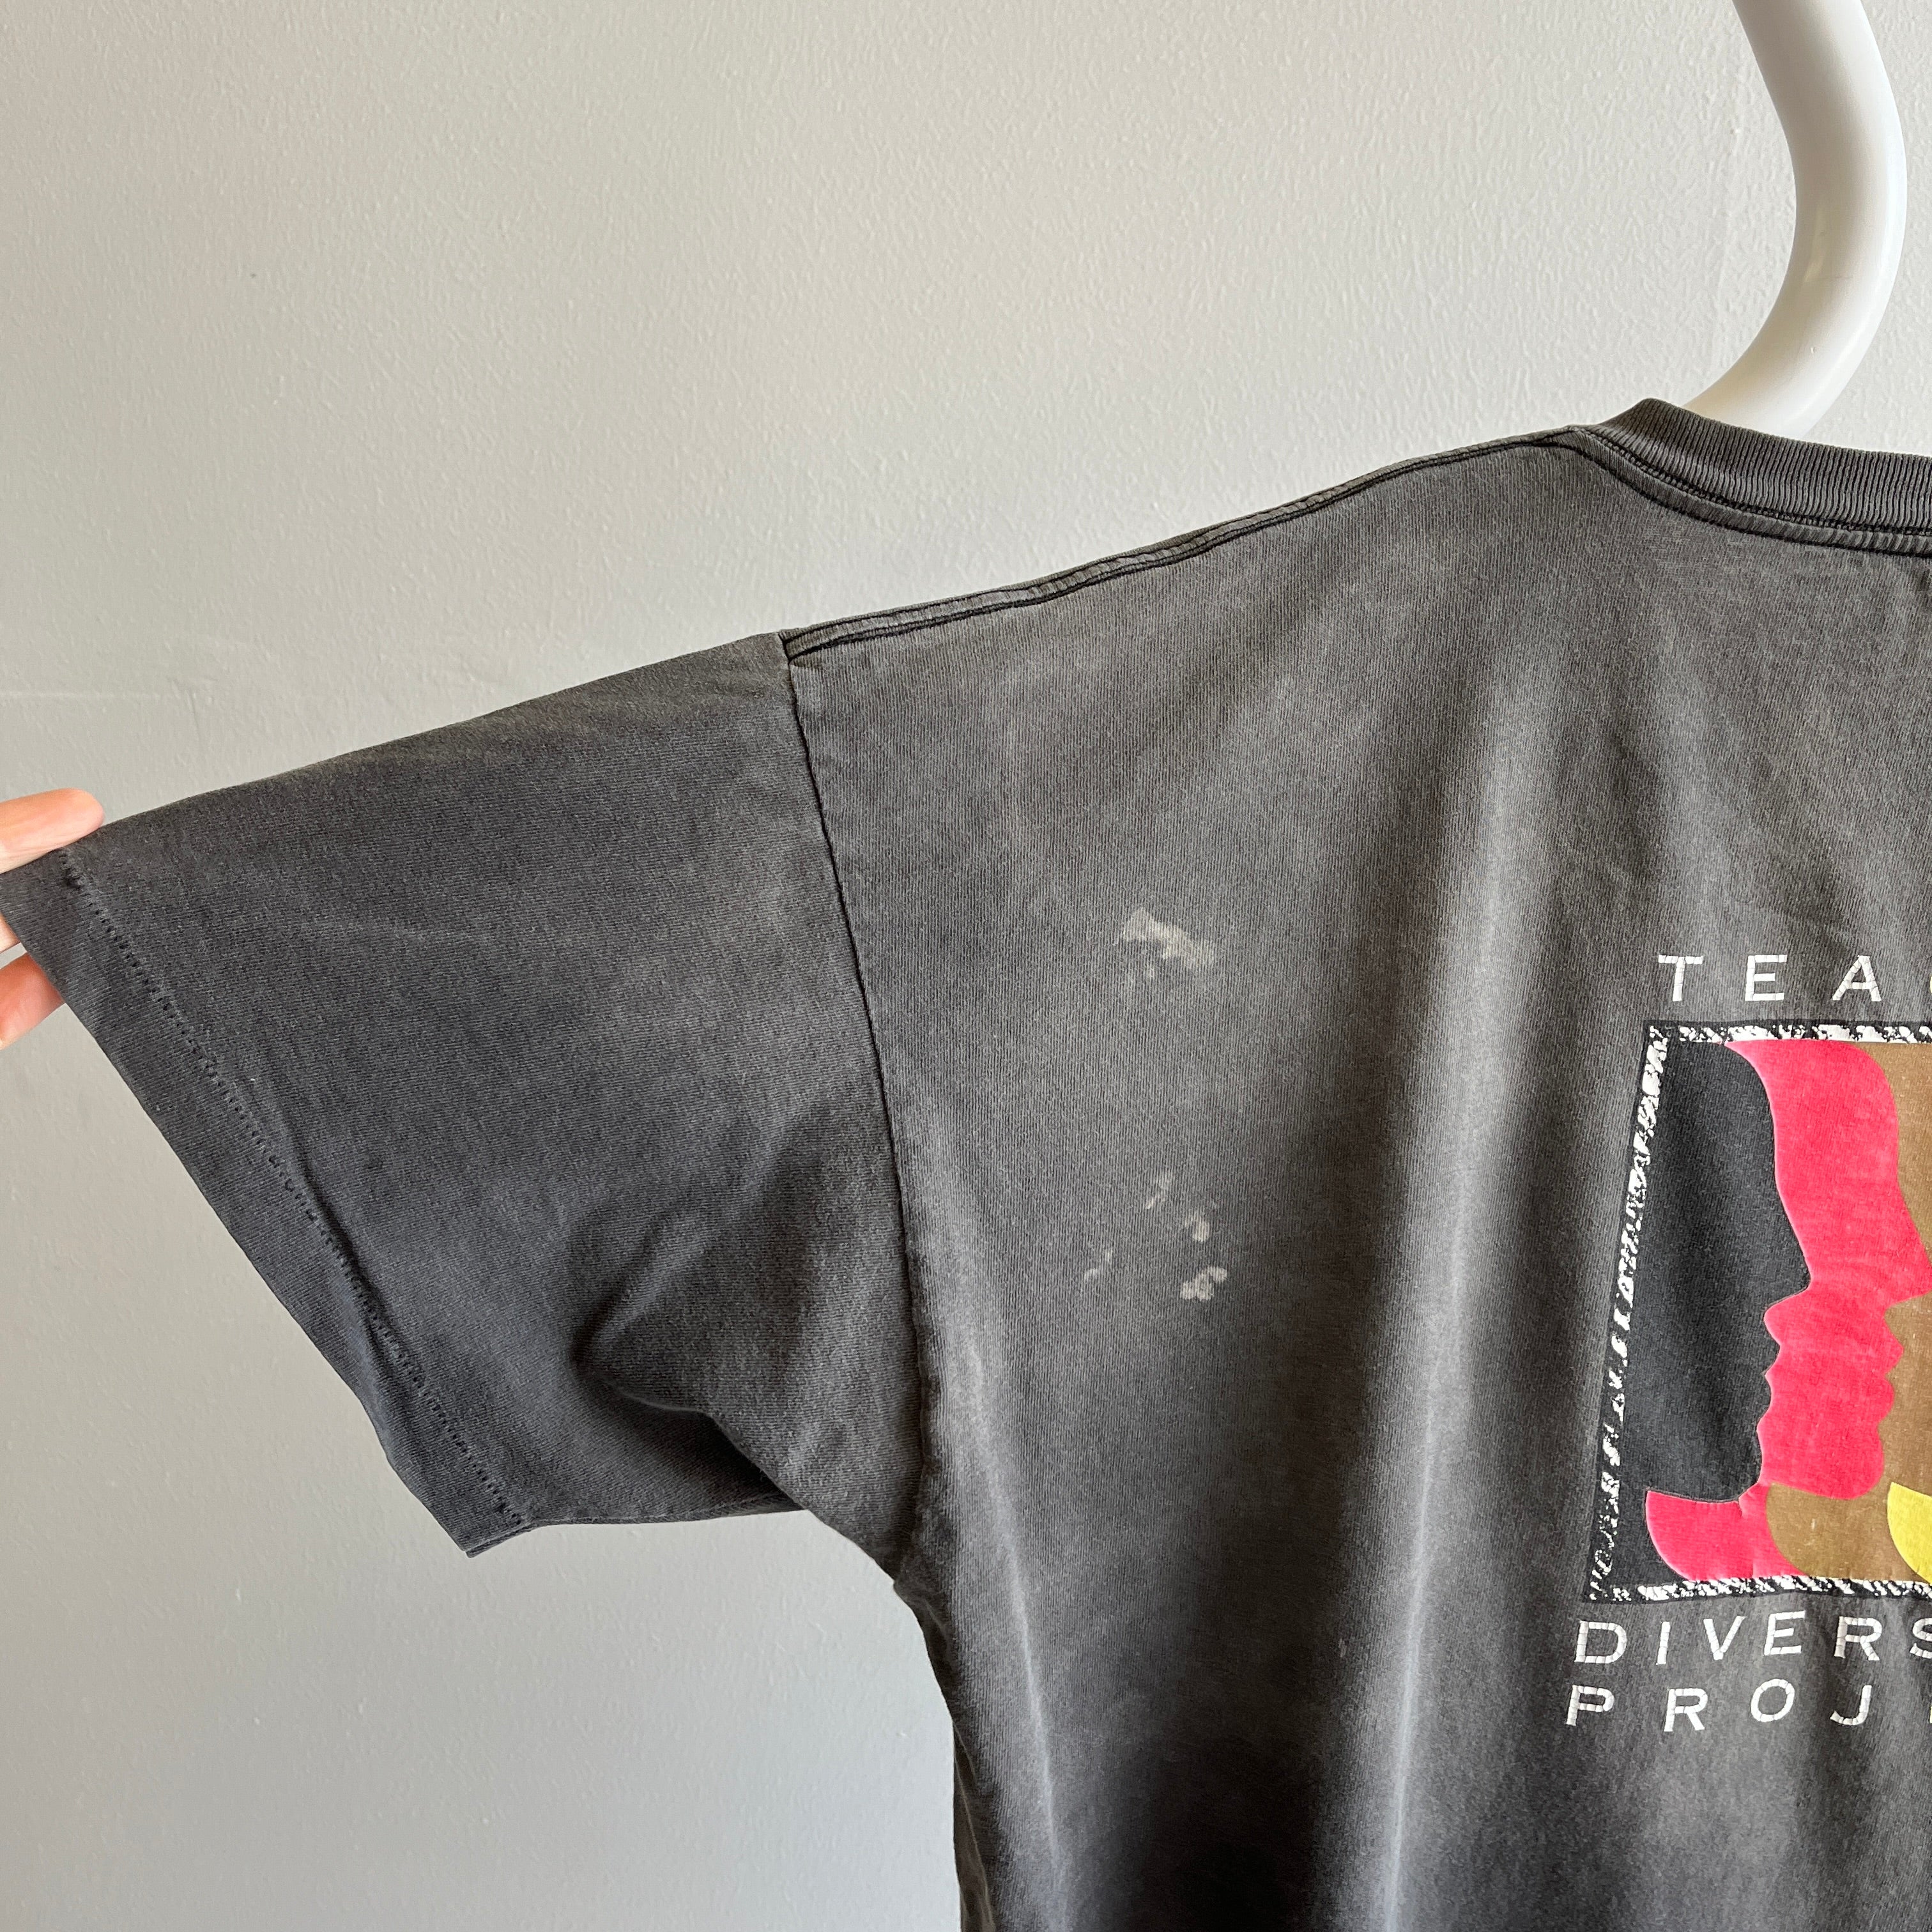 Années 1990 T-shirt OSFMany Epicly Faded Cal Poly Diversity Project - THRASHED !!!!